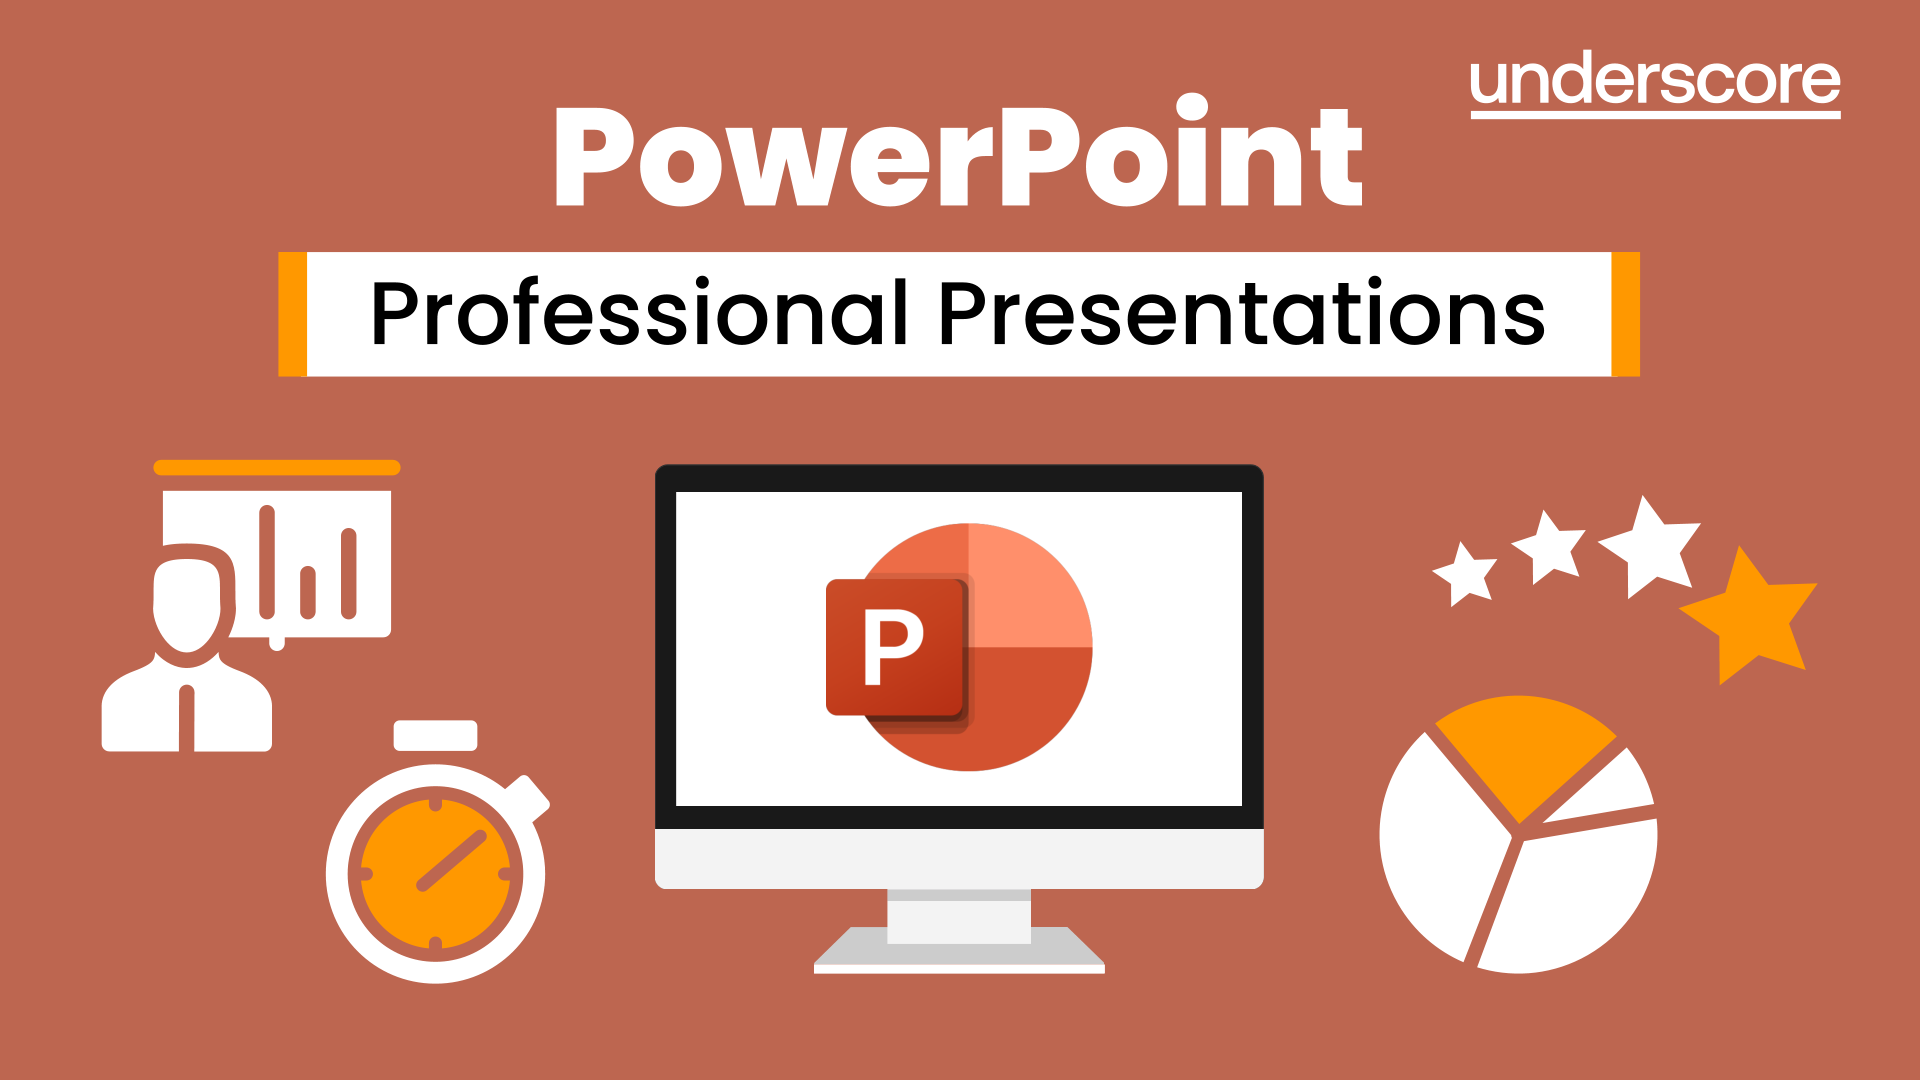 Powerpoint Professional Presentations